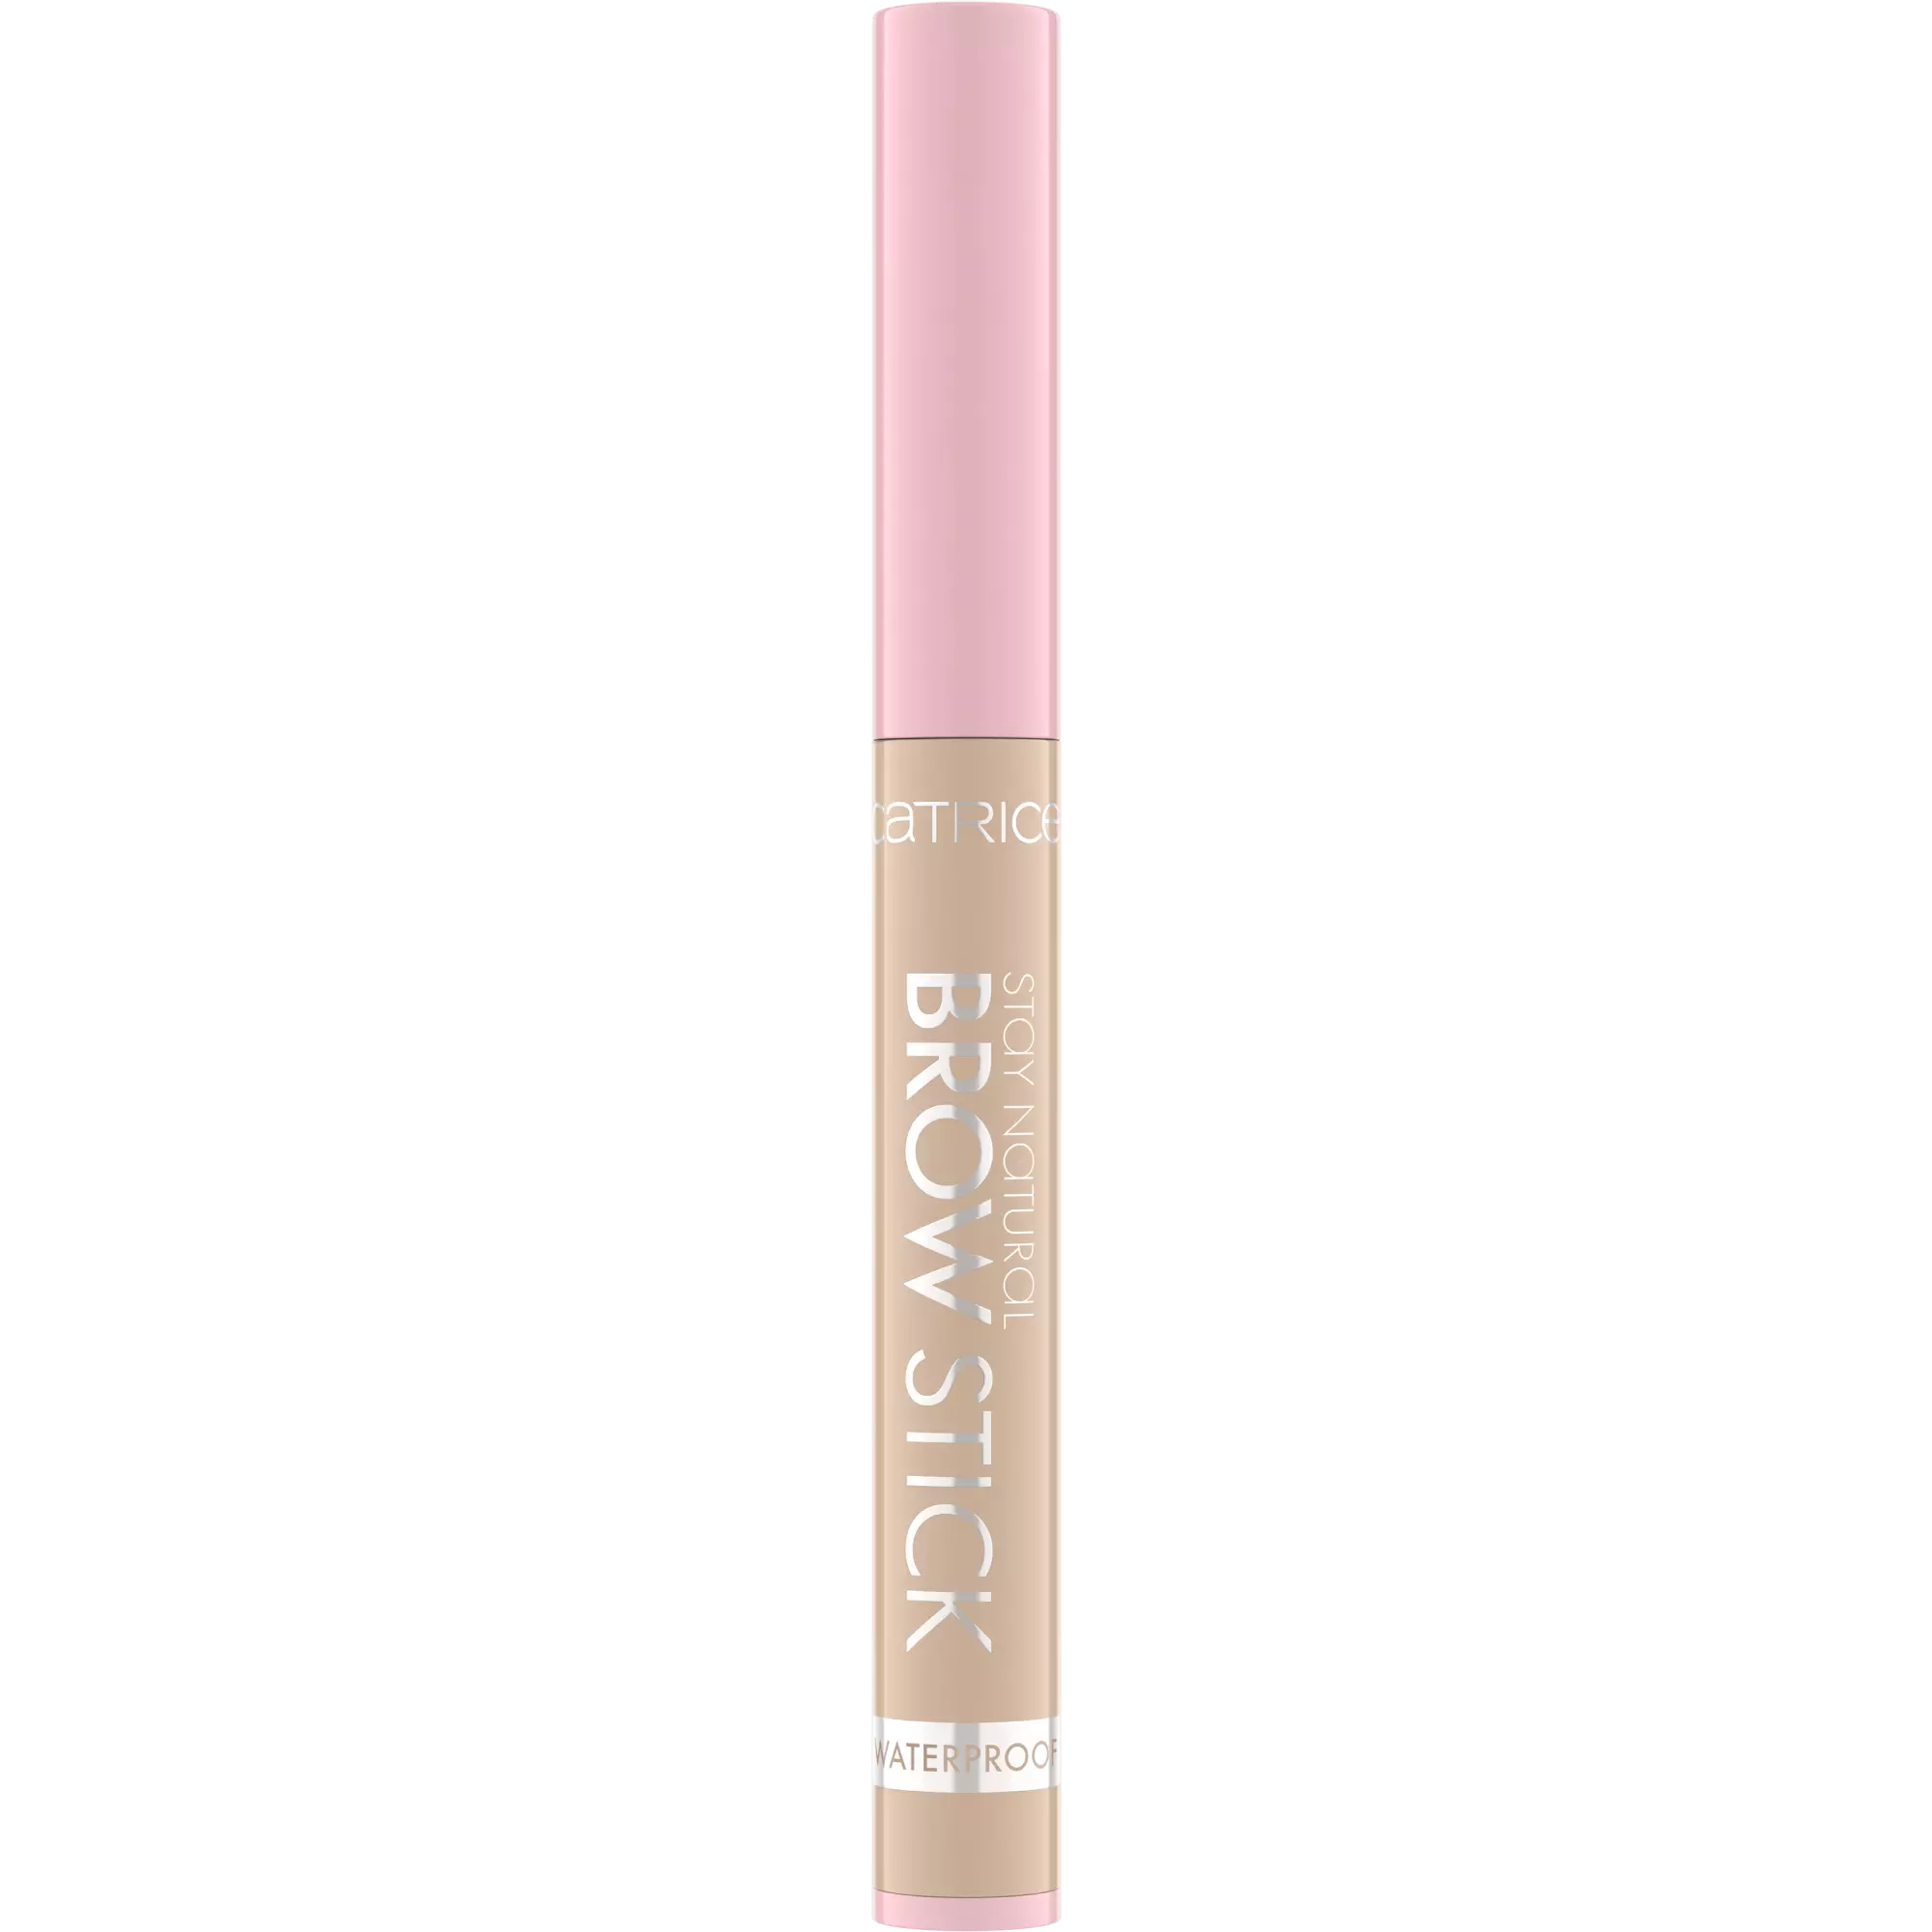 Catrice Stay Natural Brow Stick - 010 Soft Blonde